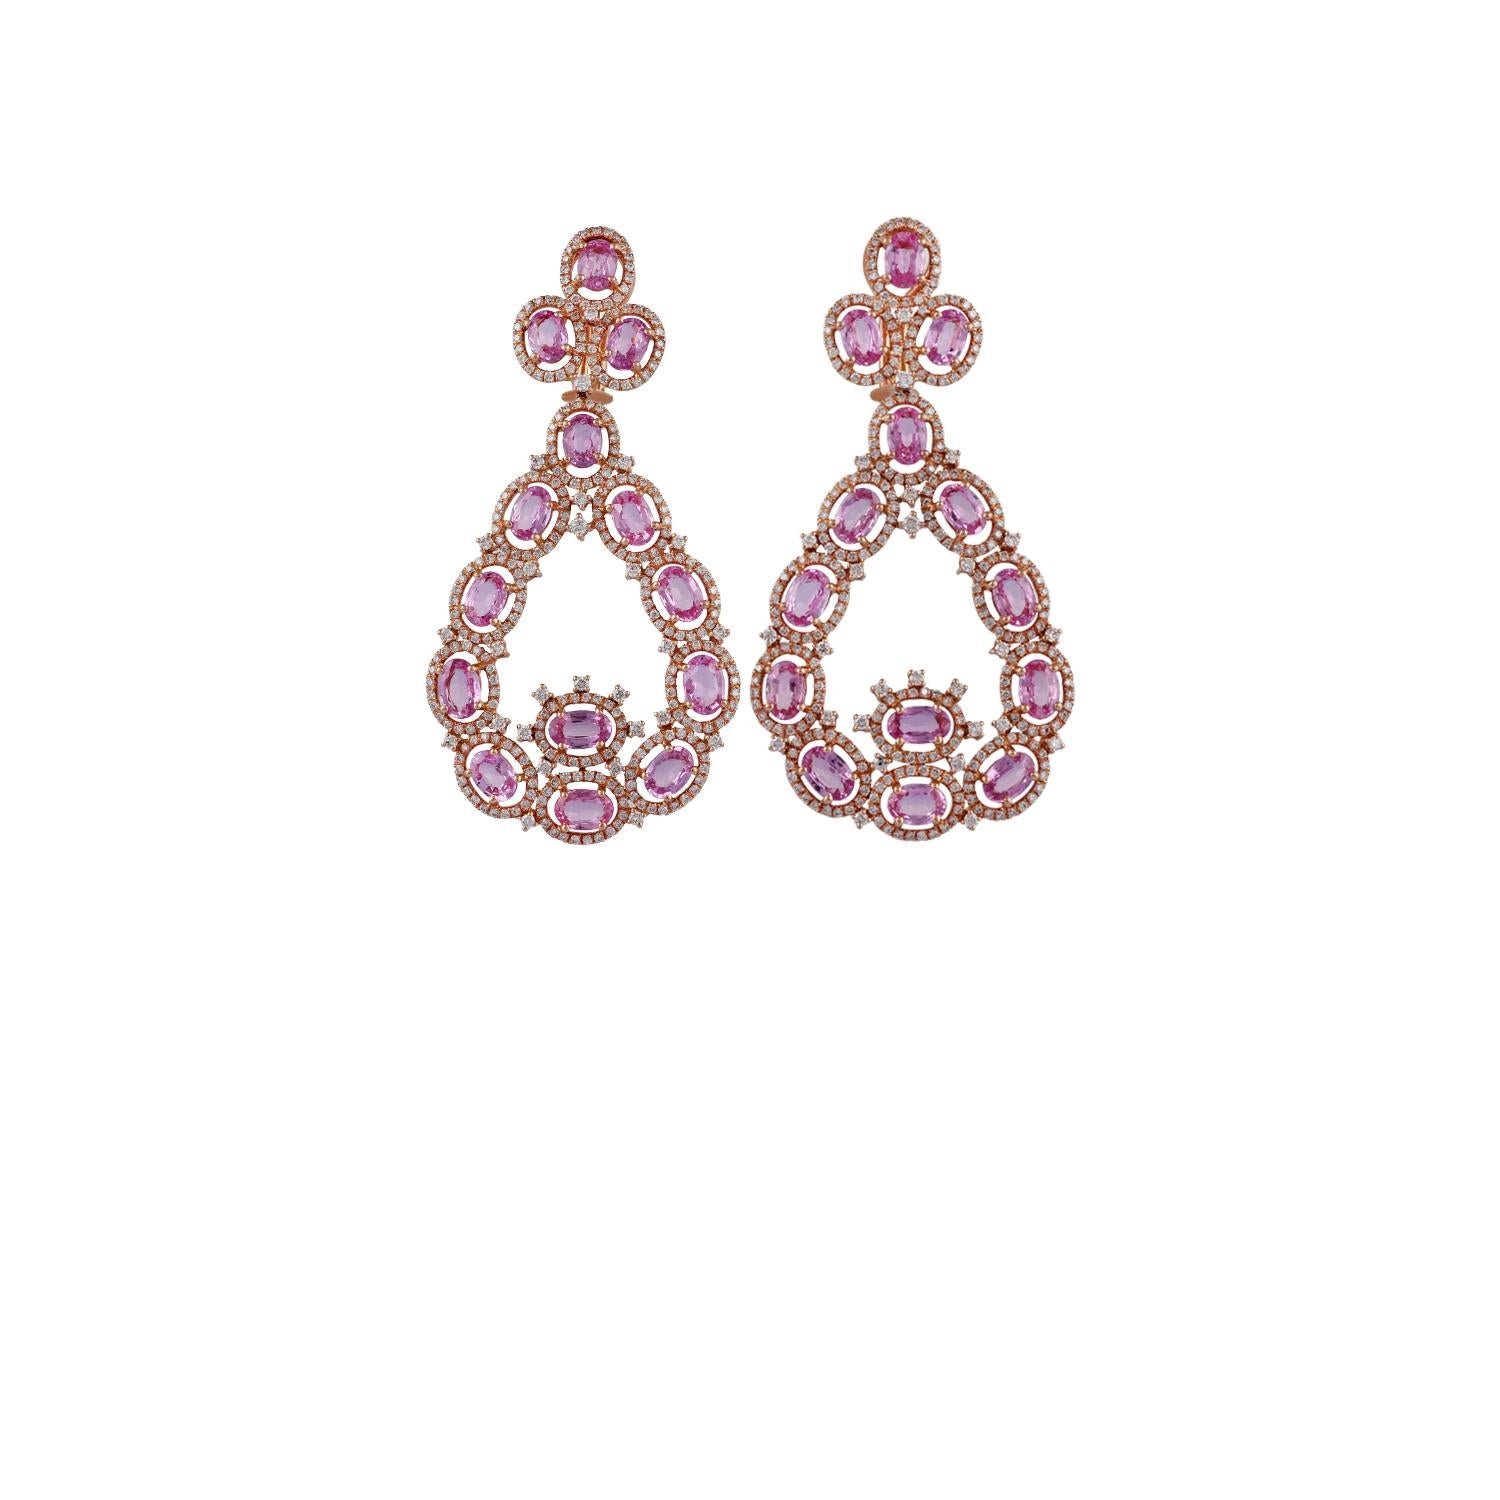 These are exclusive designer earrings studded in 18K rose gold, features 28 pieces of oval-shaped pink sapphires weight 15.70 carats & 614 pieces of round shaped diamonds weight 3.60 carats, the entire earrings are studded in 18K rose gold weight